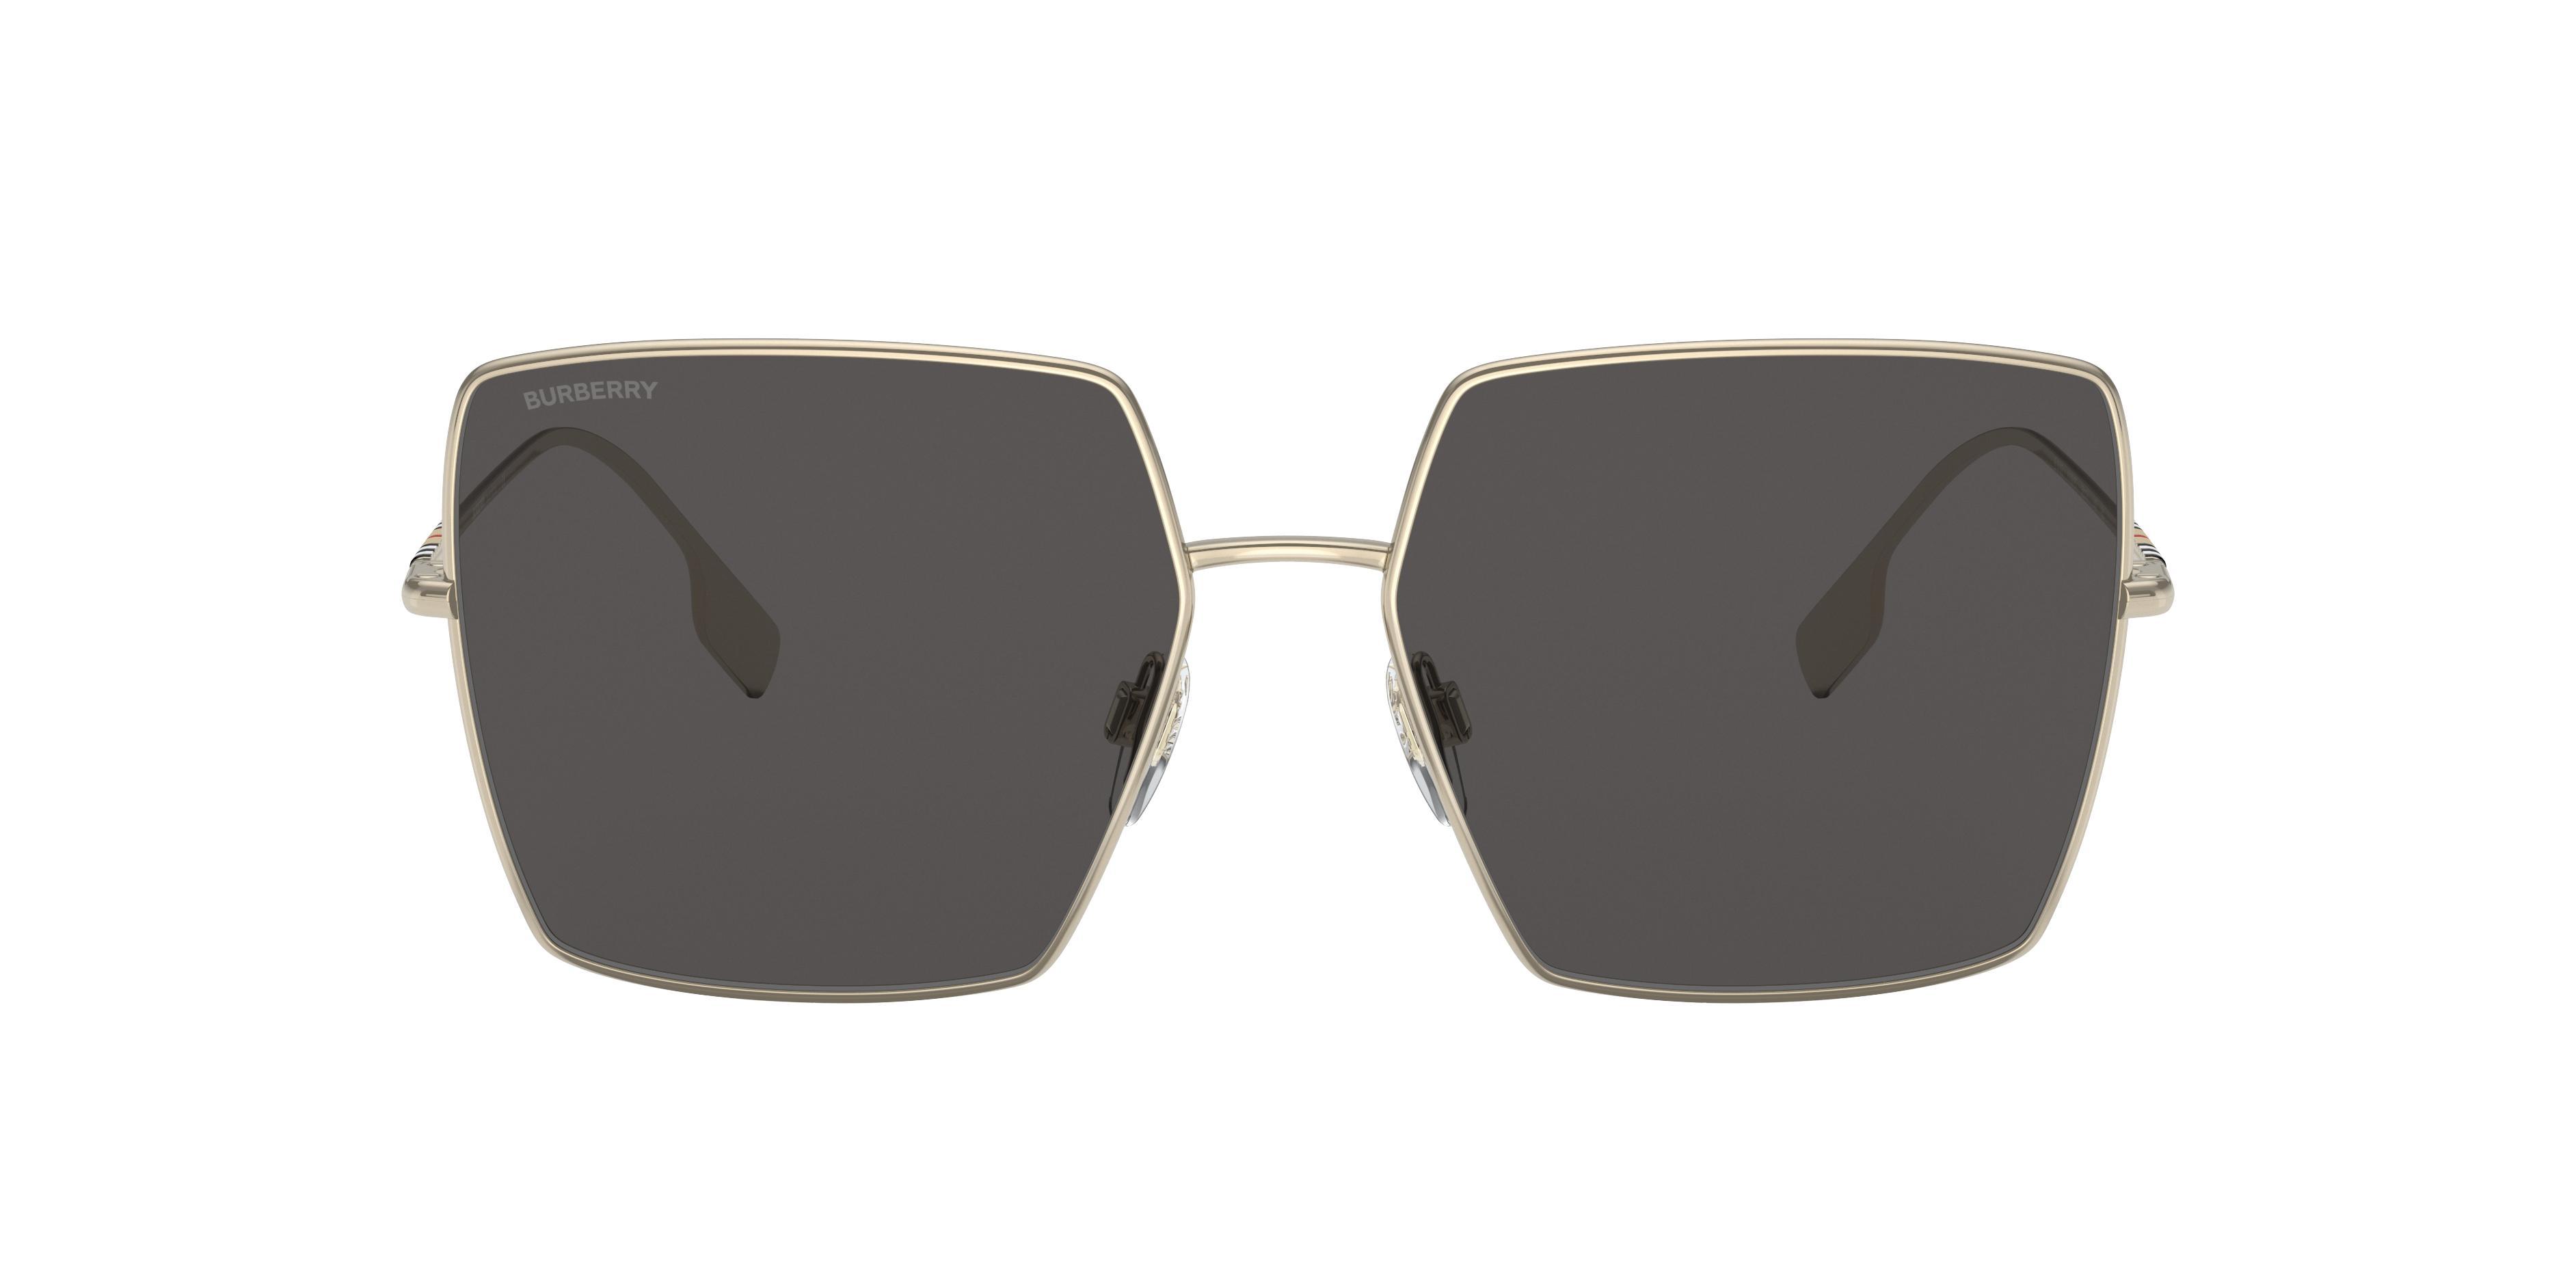 burberry 58mm Square Sunglasses Product Image